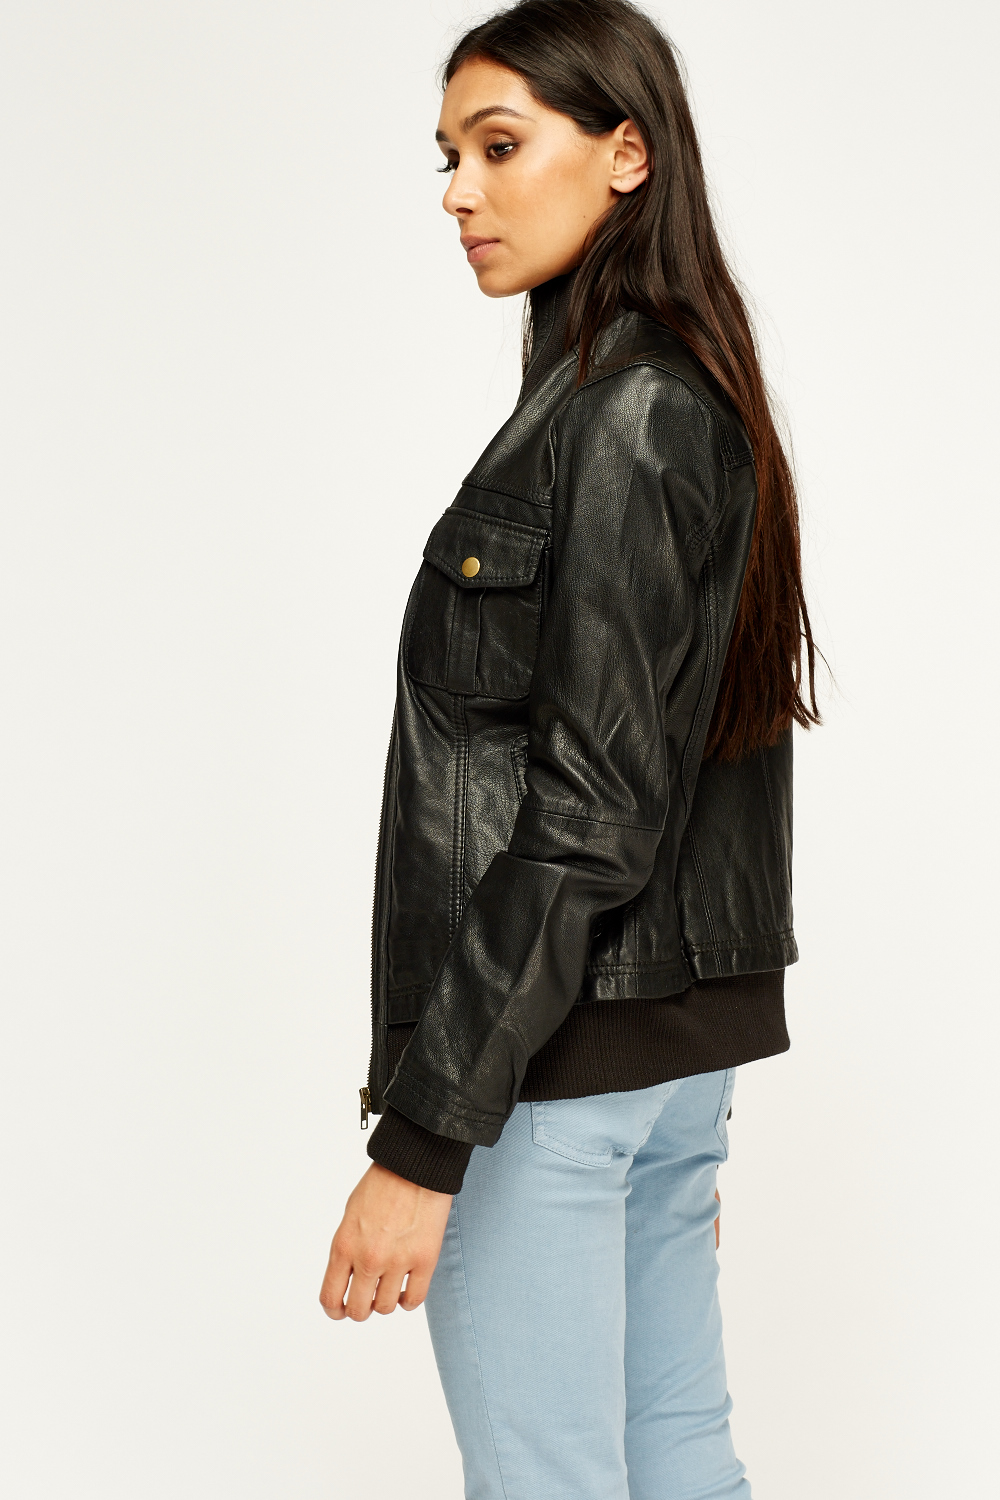 Onko Classic Leather Jacket - Limited edition | Discount Designer Stock